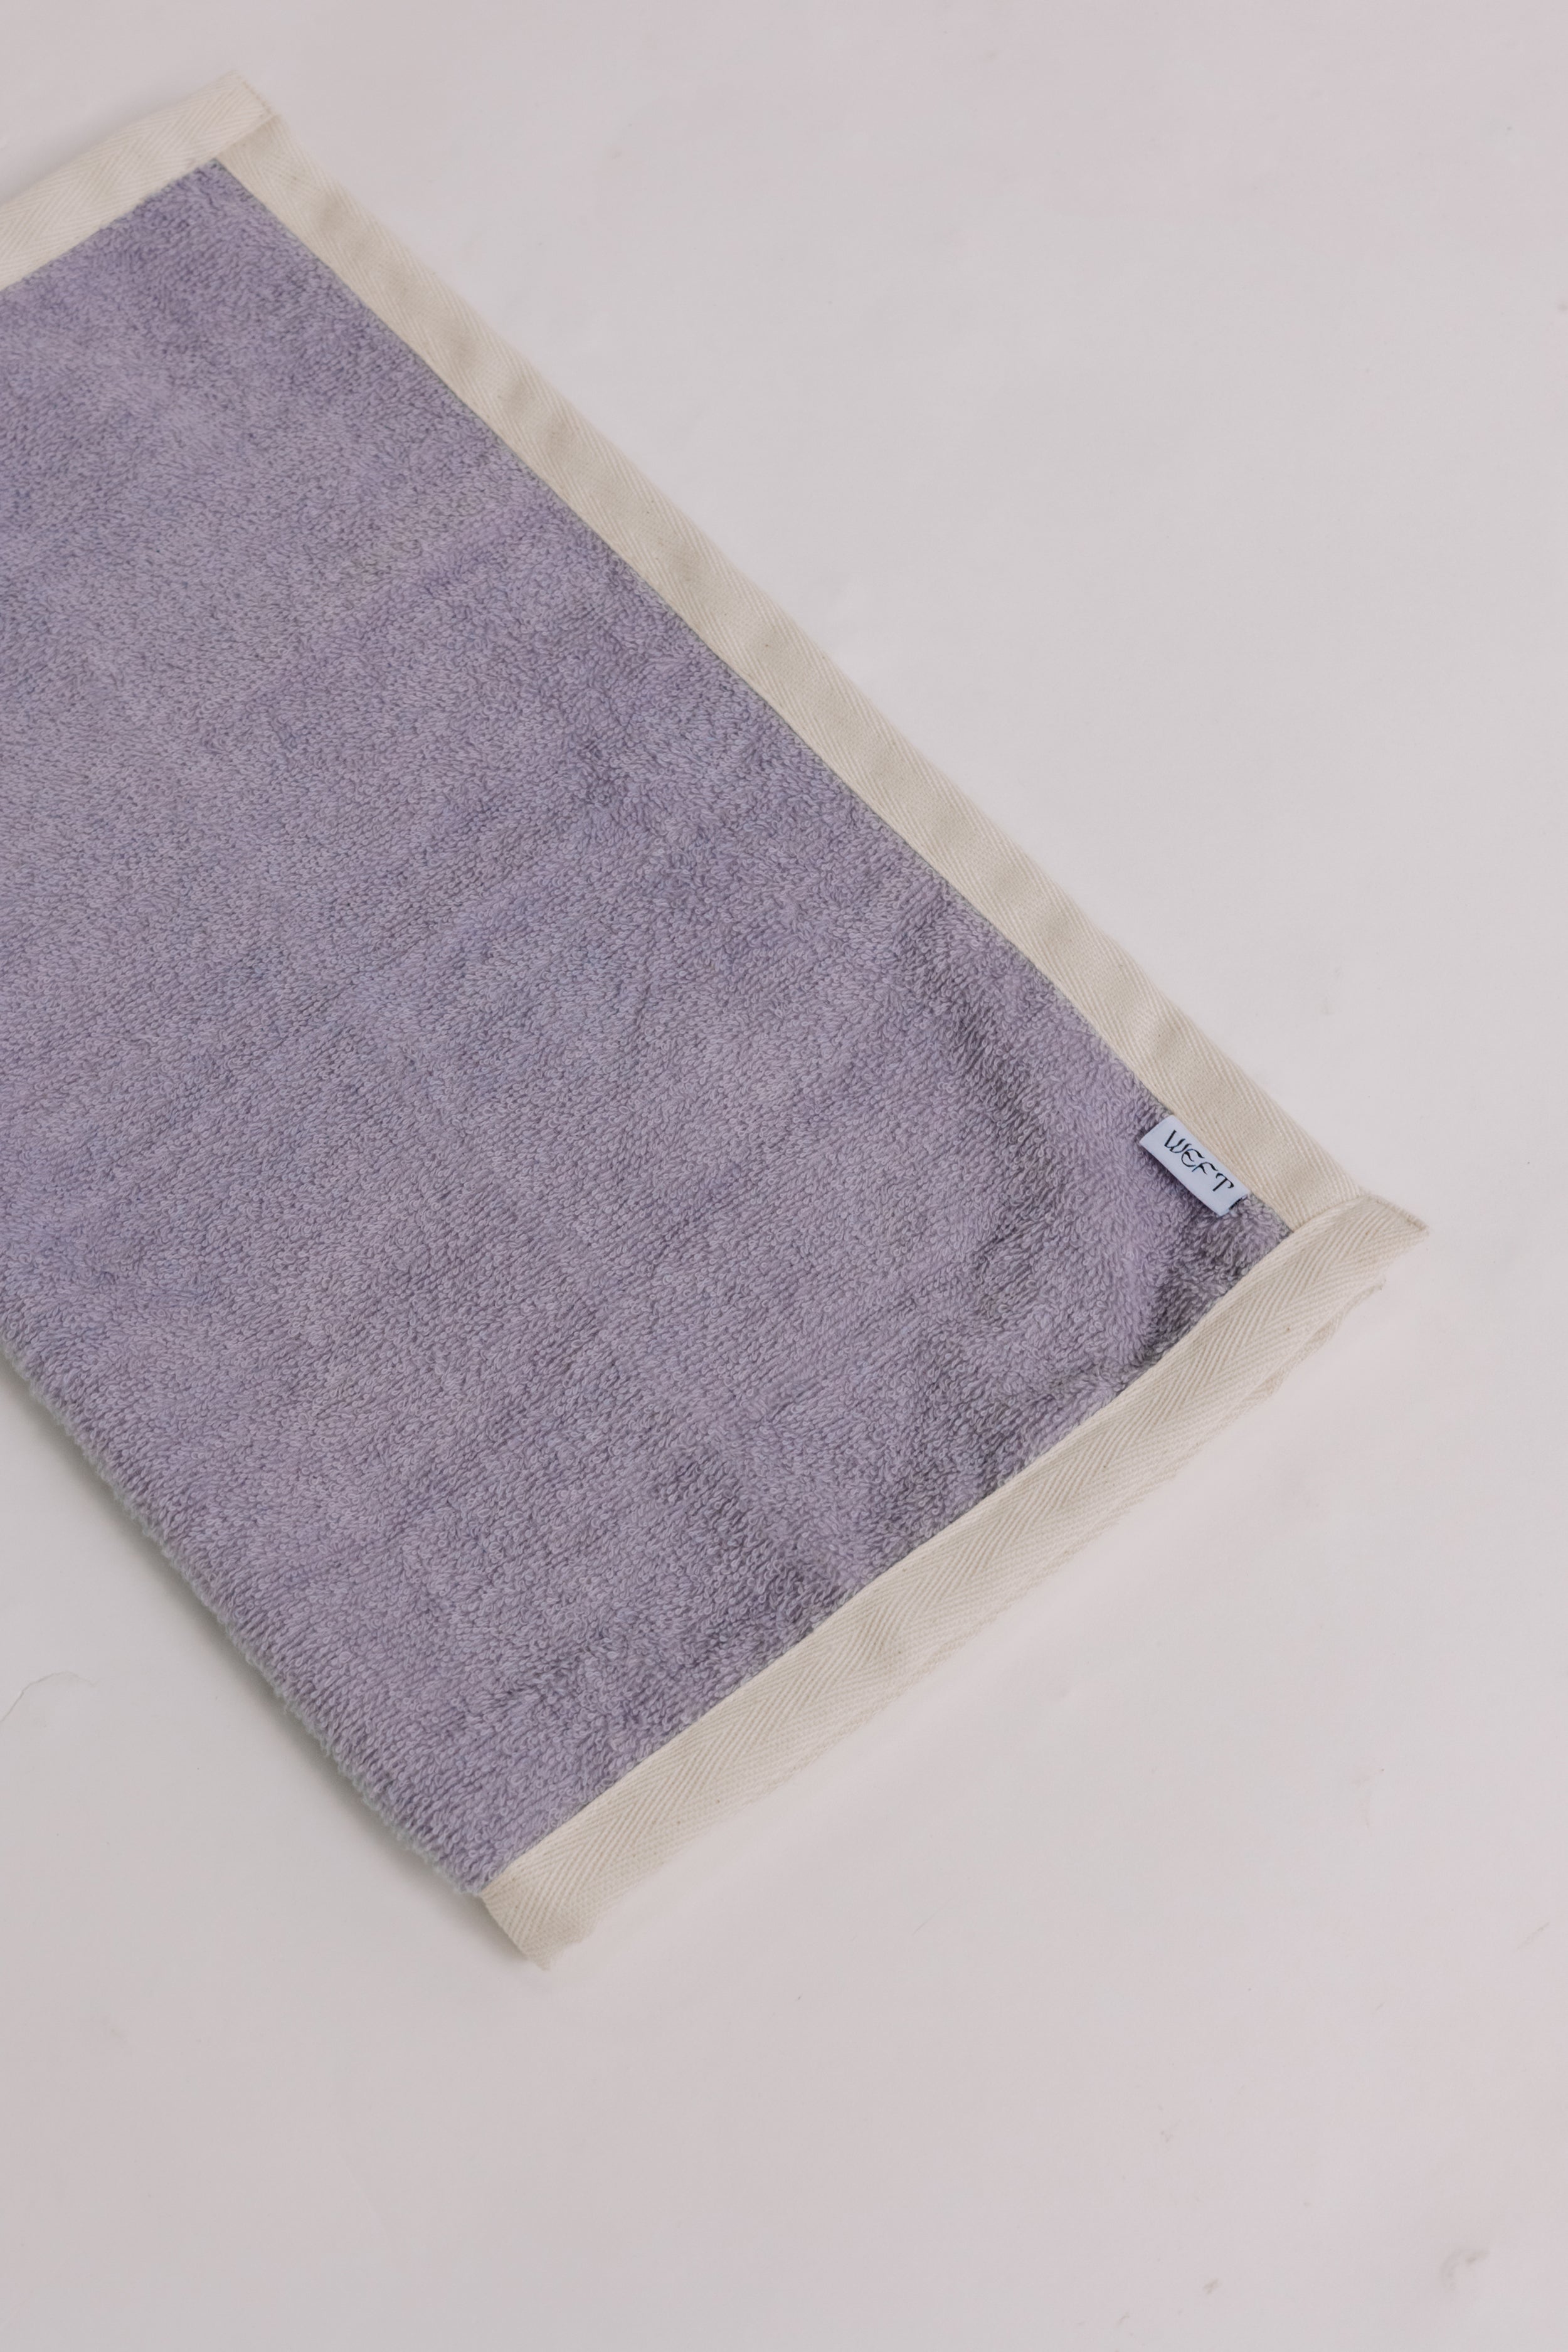 Face Cloth in Lilac